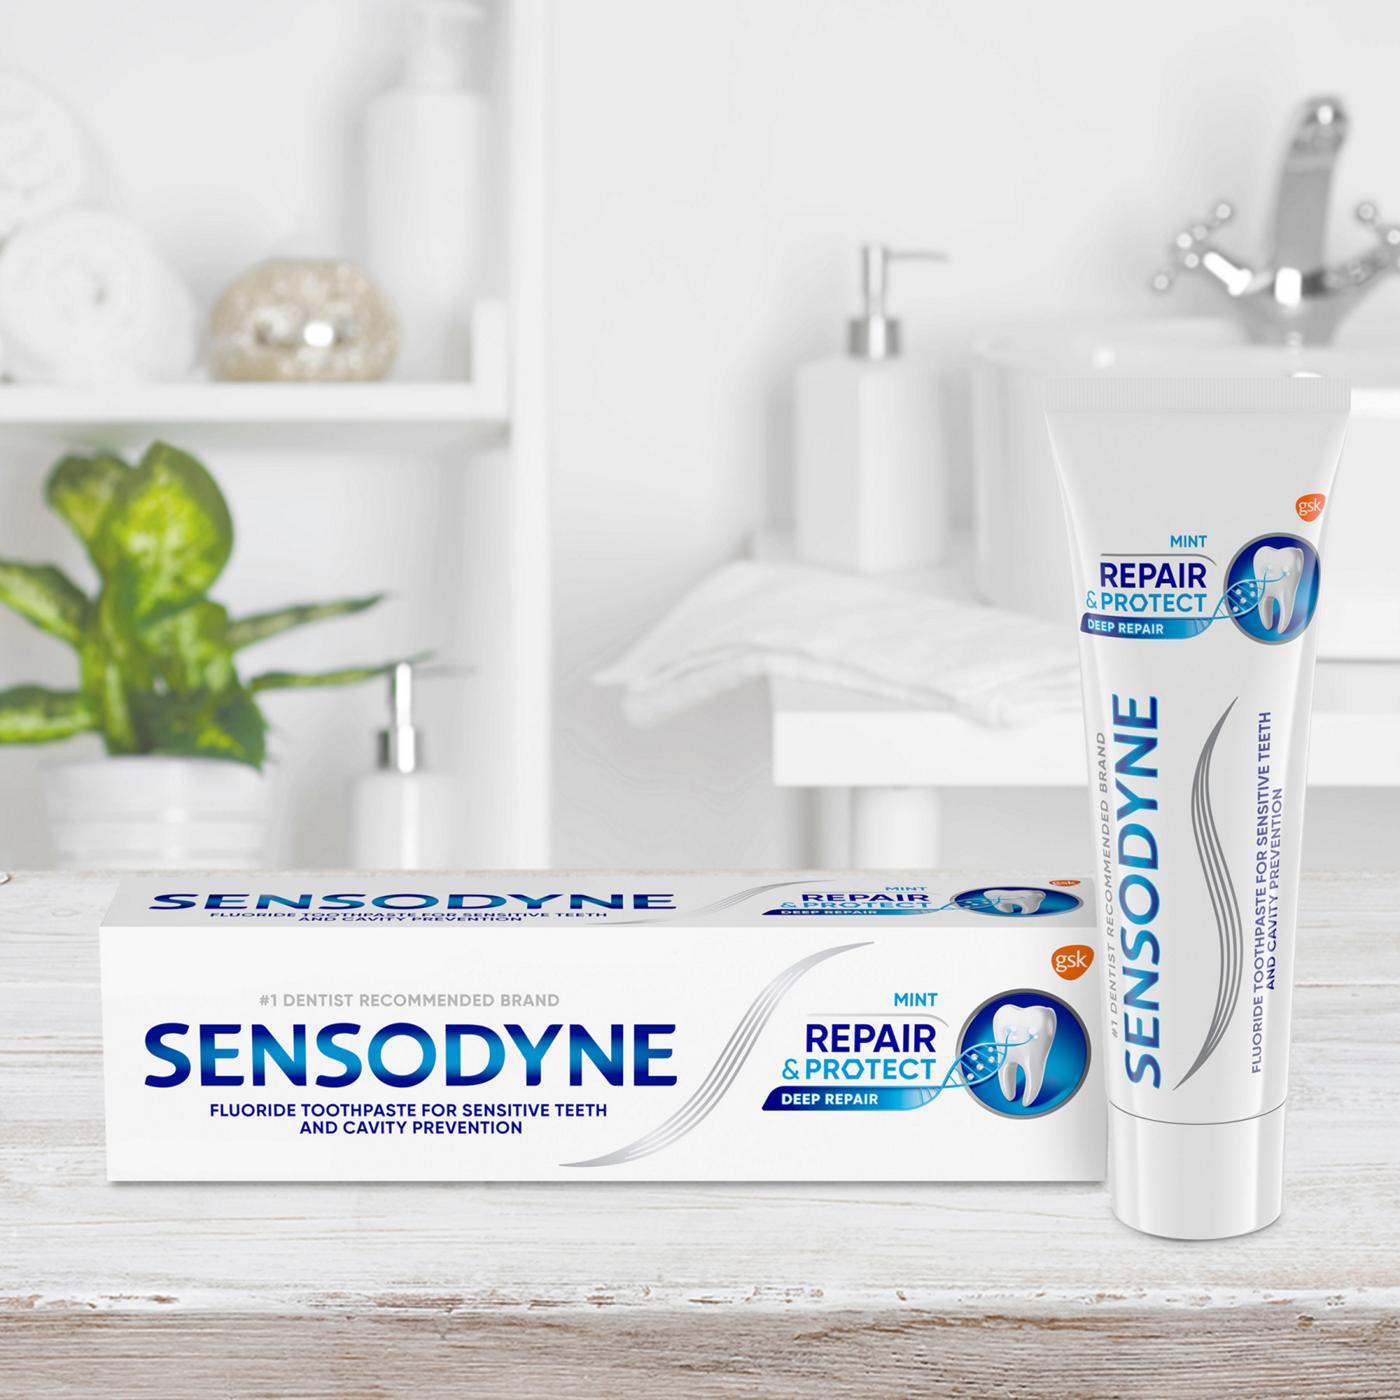 Sensodyne Repair and Protect Sensitive Toothpaste; image 5 of 7